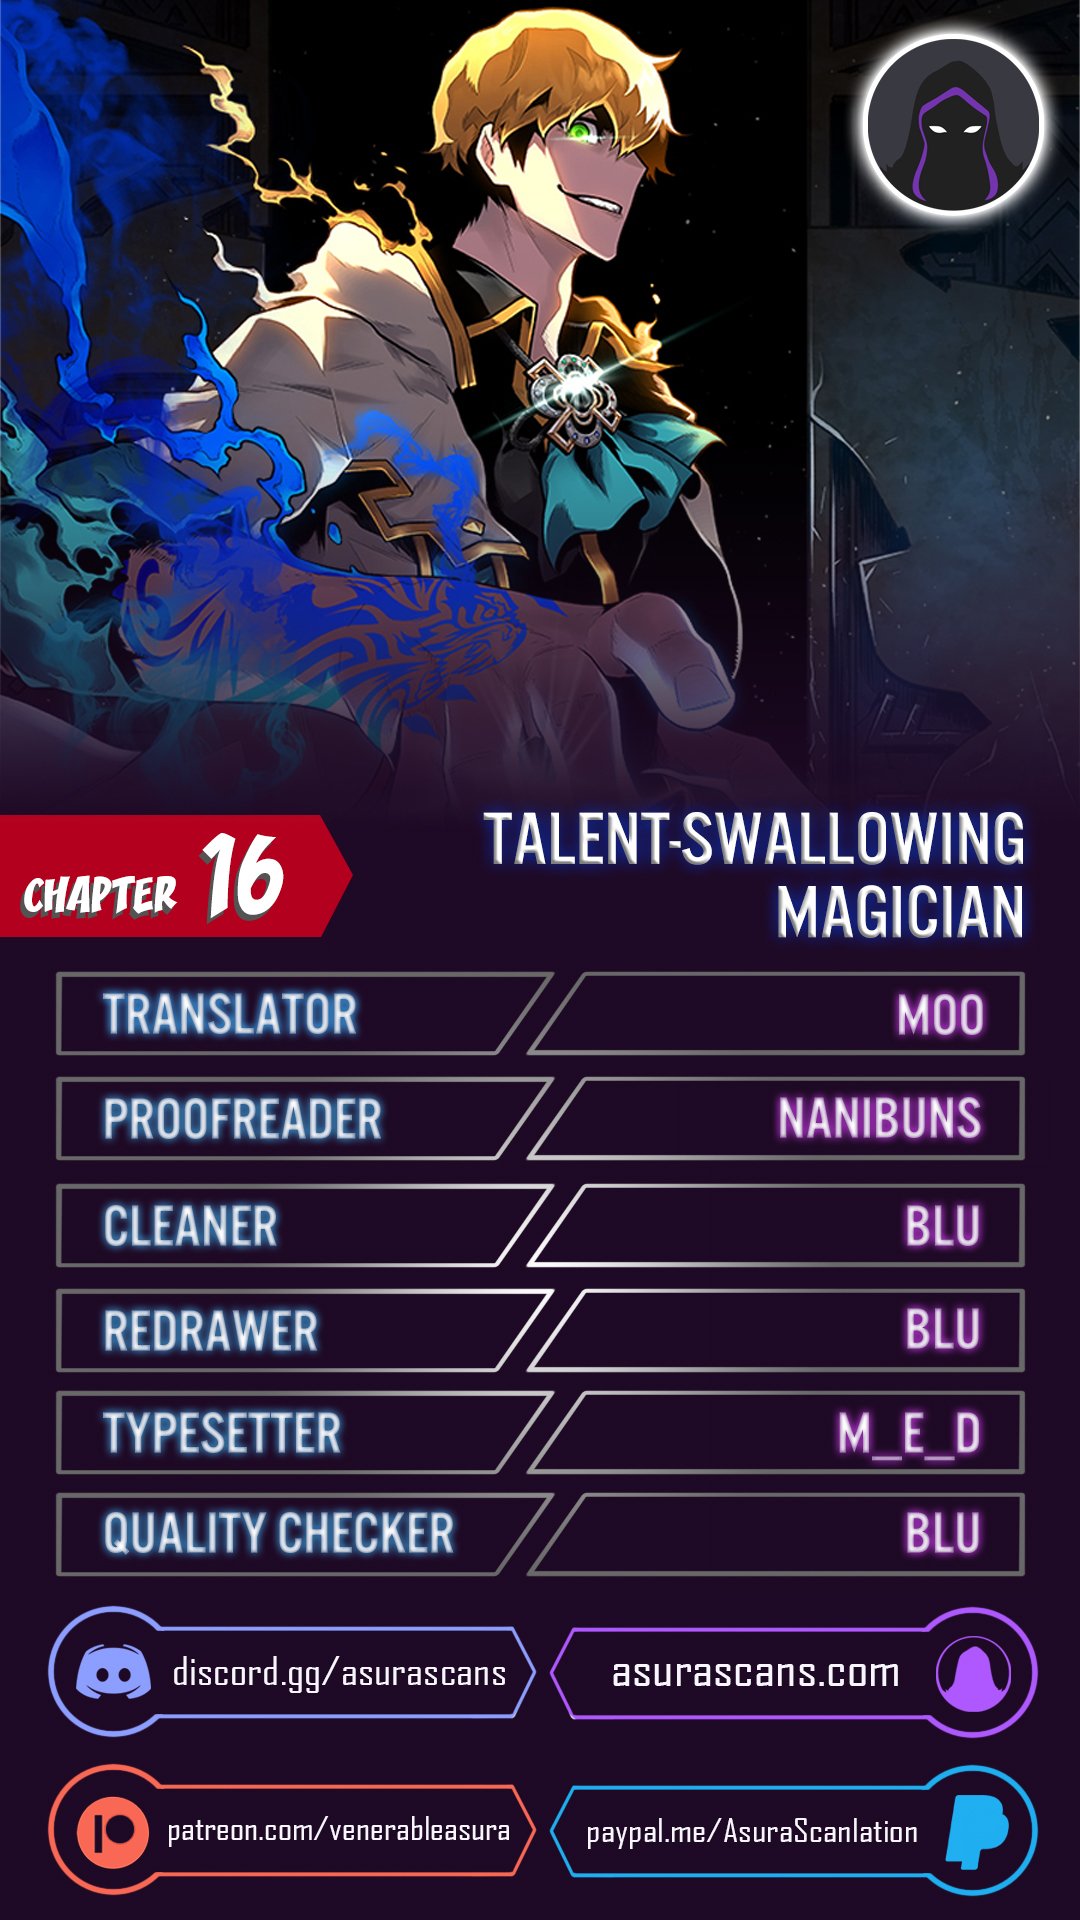 Talent-Swallowing Magician - Chapter 15414 - Image 1